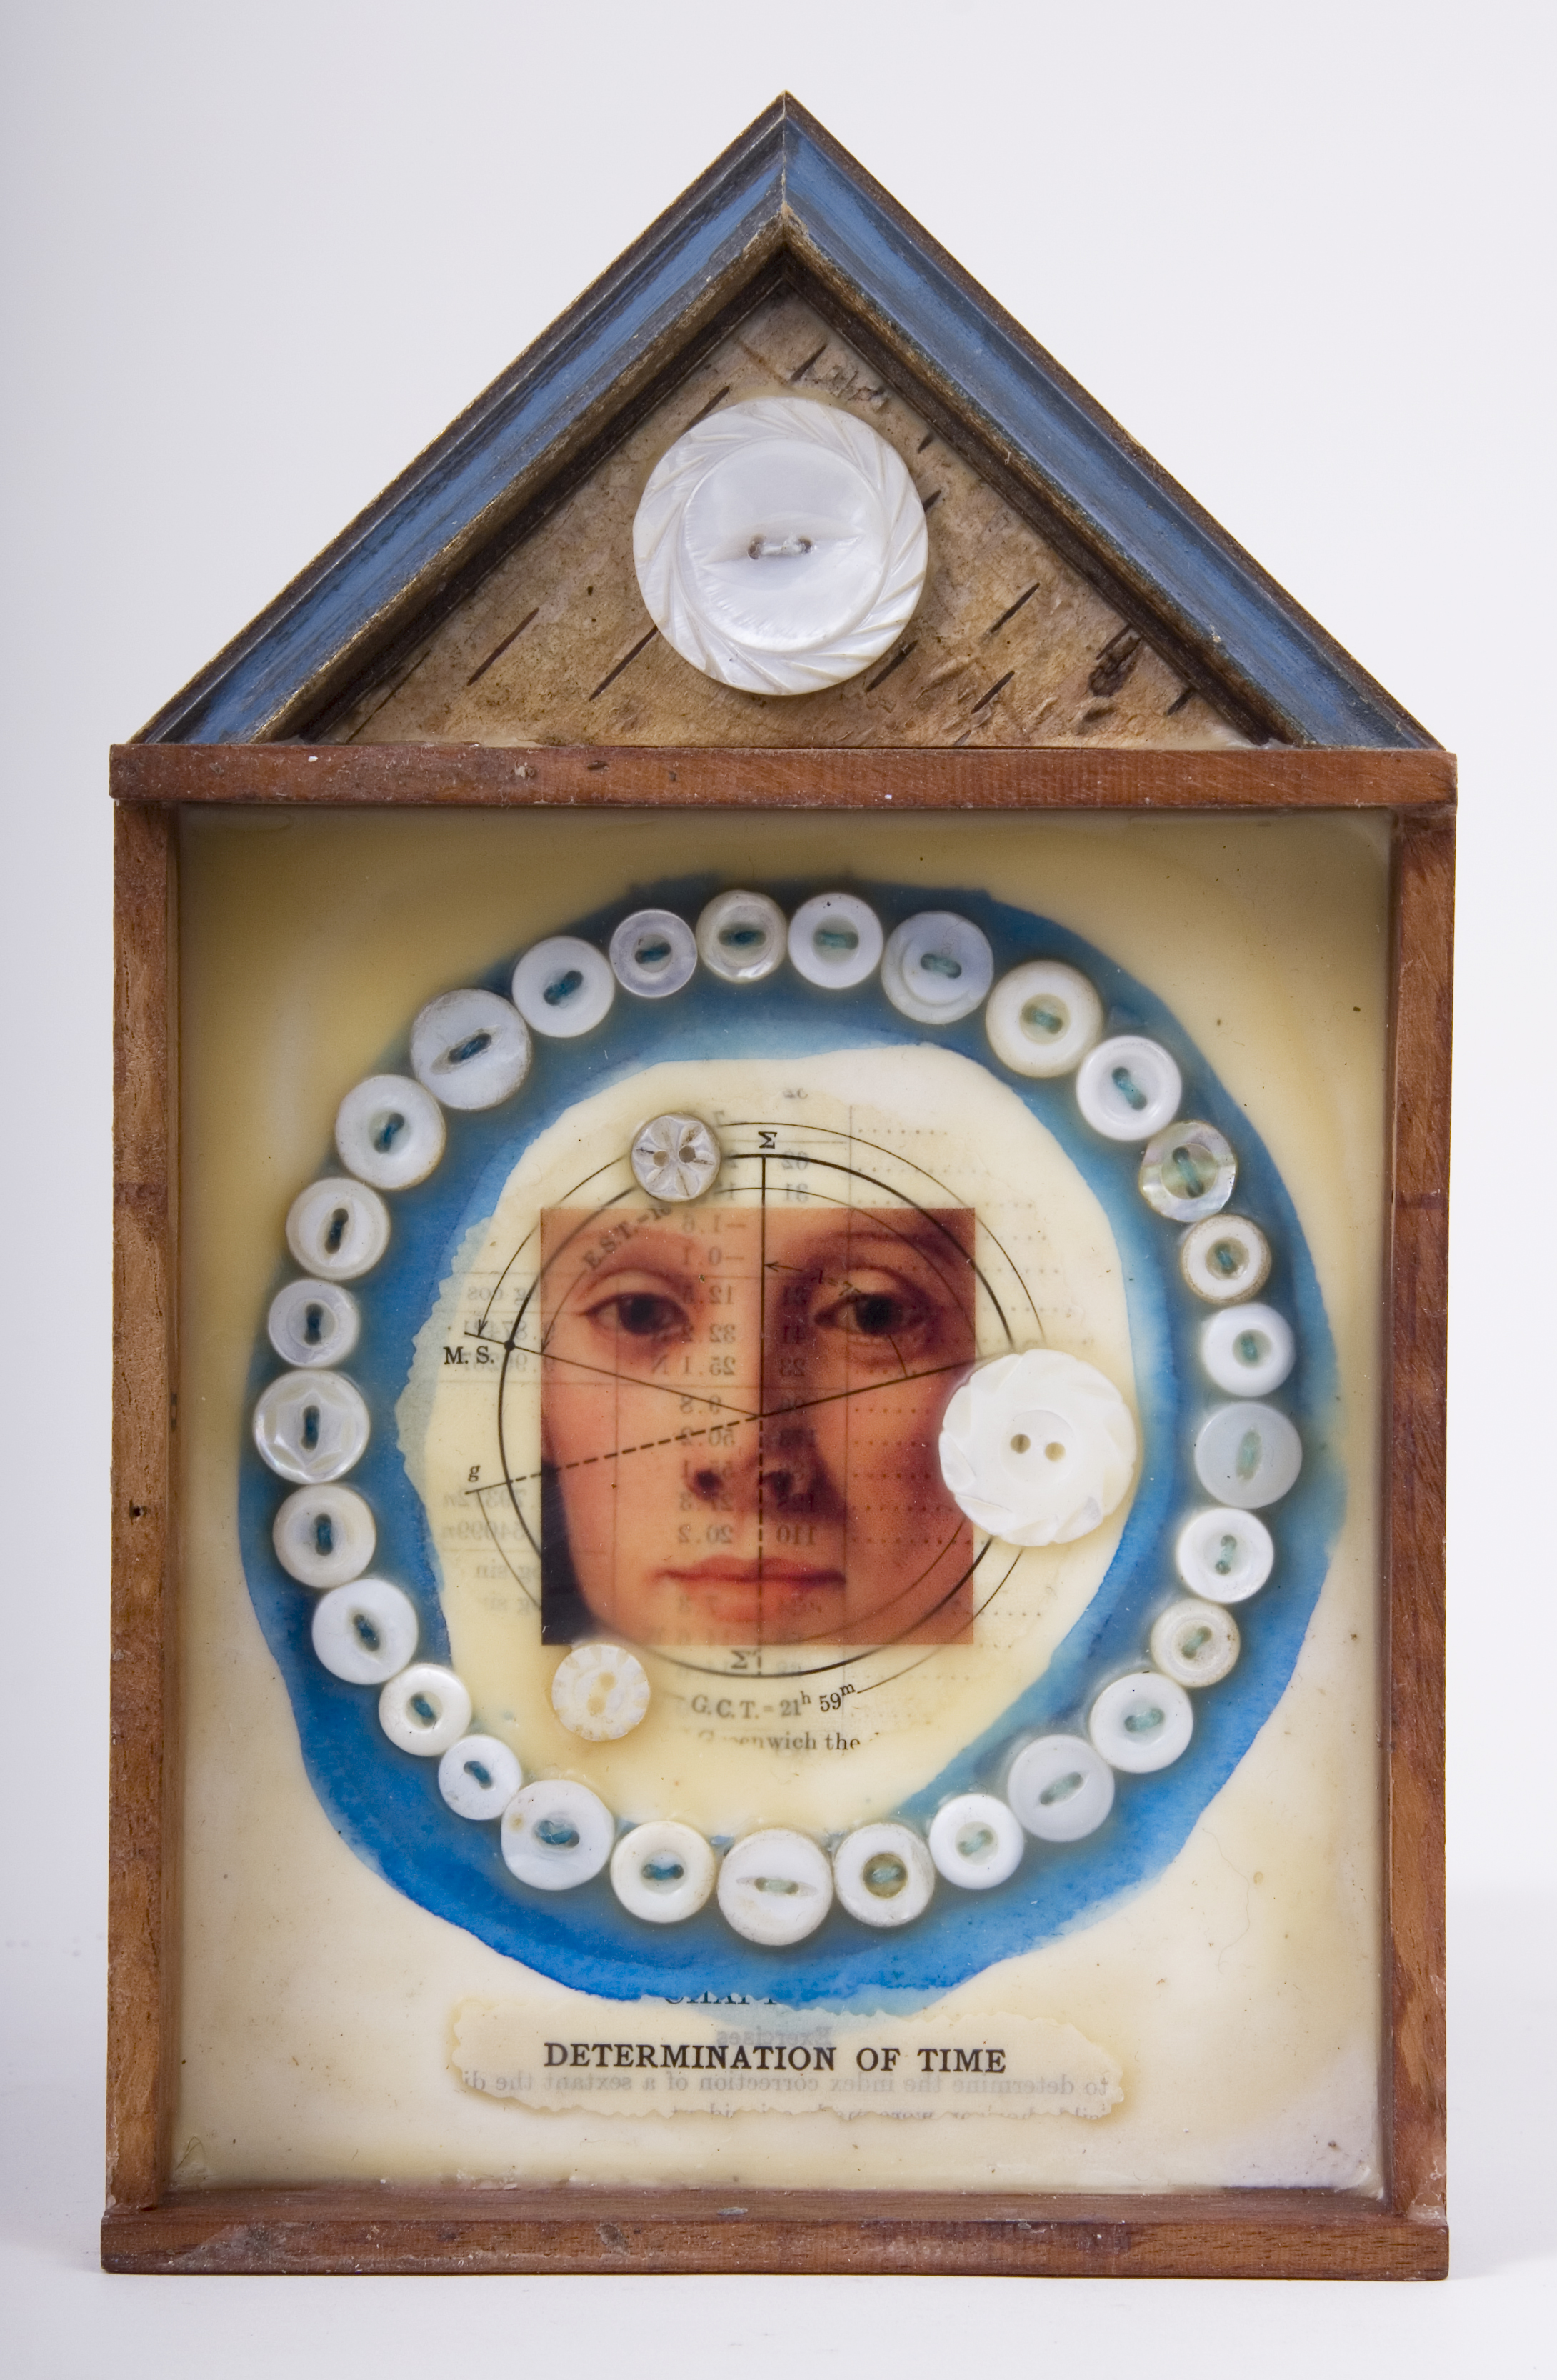     \"Determination of Time\"
    mixed-media assemblage
    9 x 5.5 x 1.25
    2009
    $75.00
    Cigar box, frame sample, birch bark, mother of pearl buttons, transparency, ink, wax, astronomy text on watercolor paper